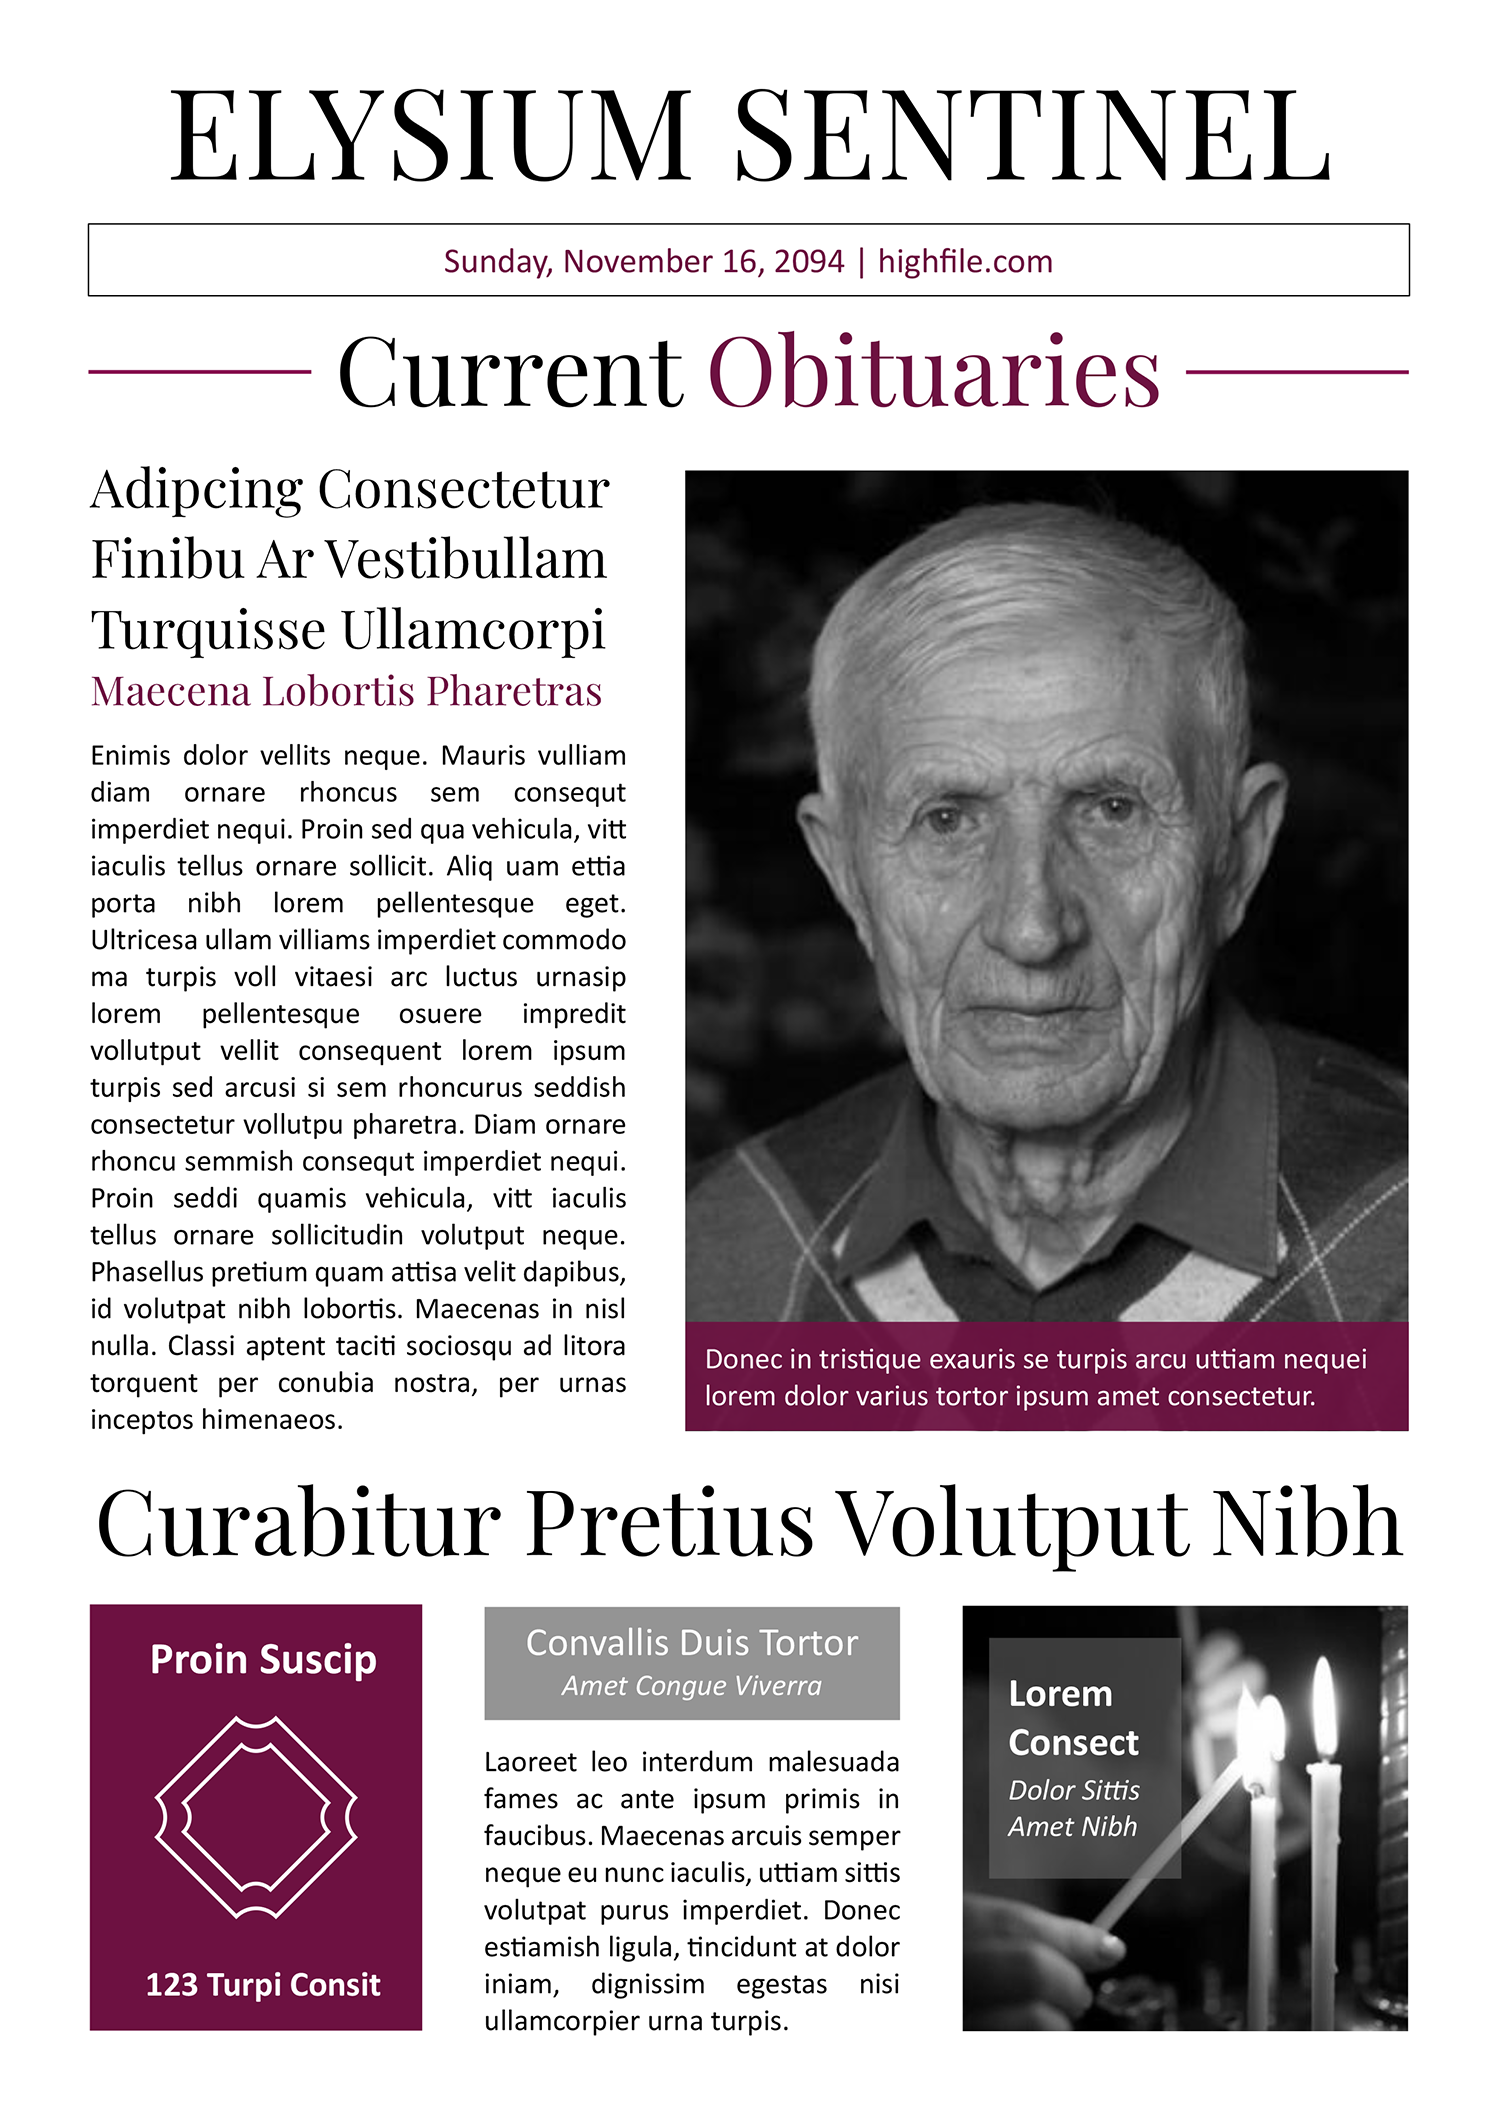 A4 Newspaper Obituary Template - Page 01